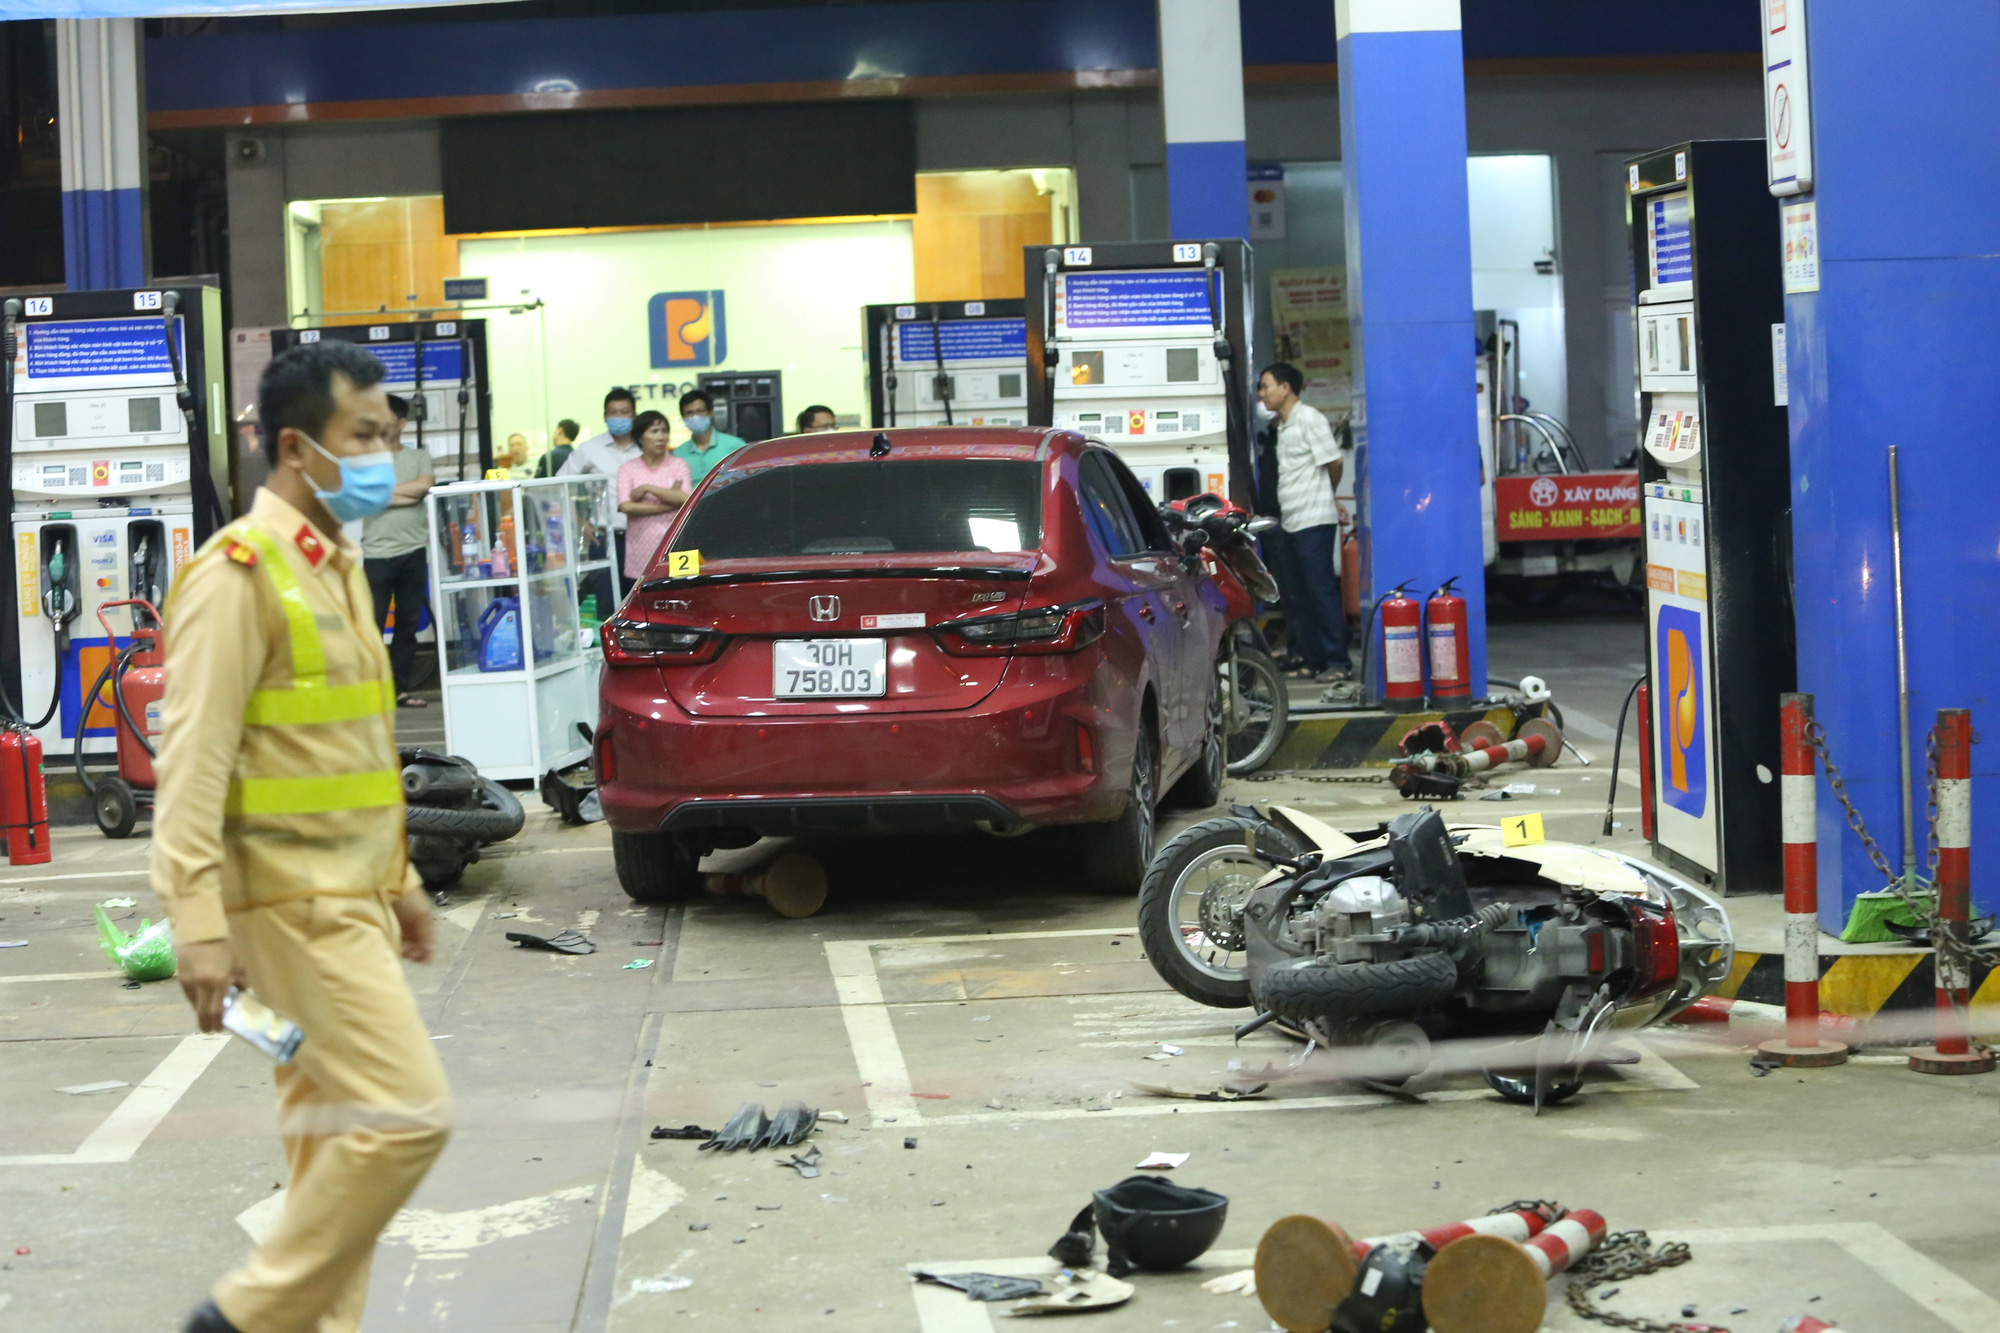 8 injured as car crashes into filling station in Hanoi